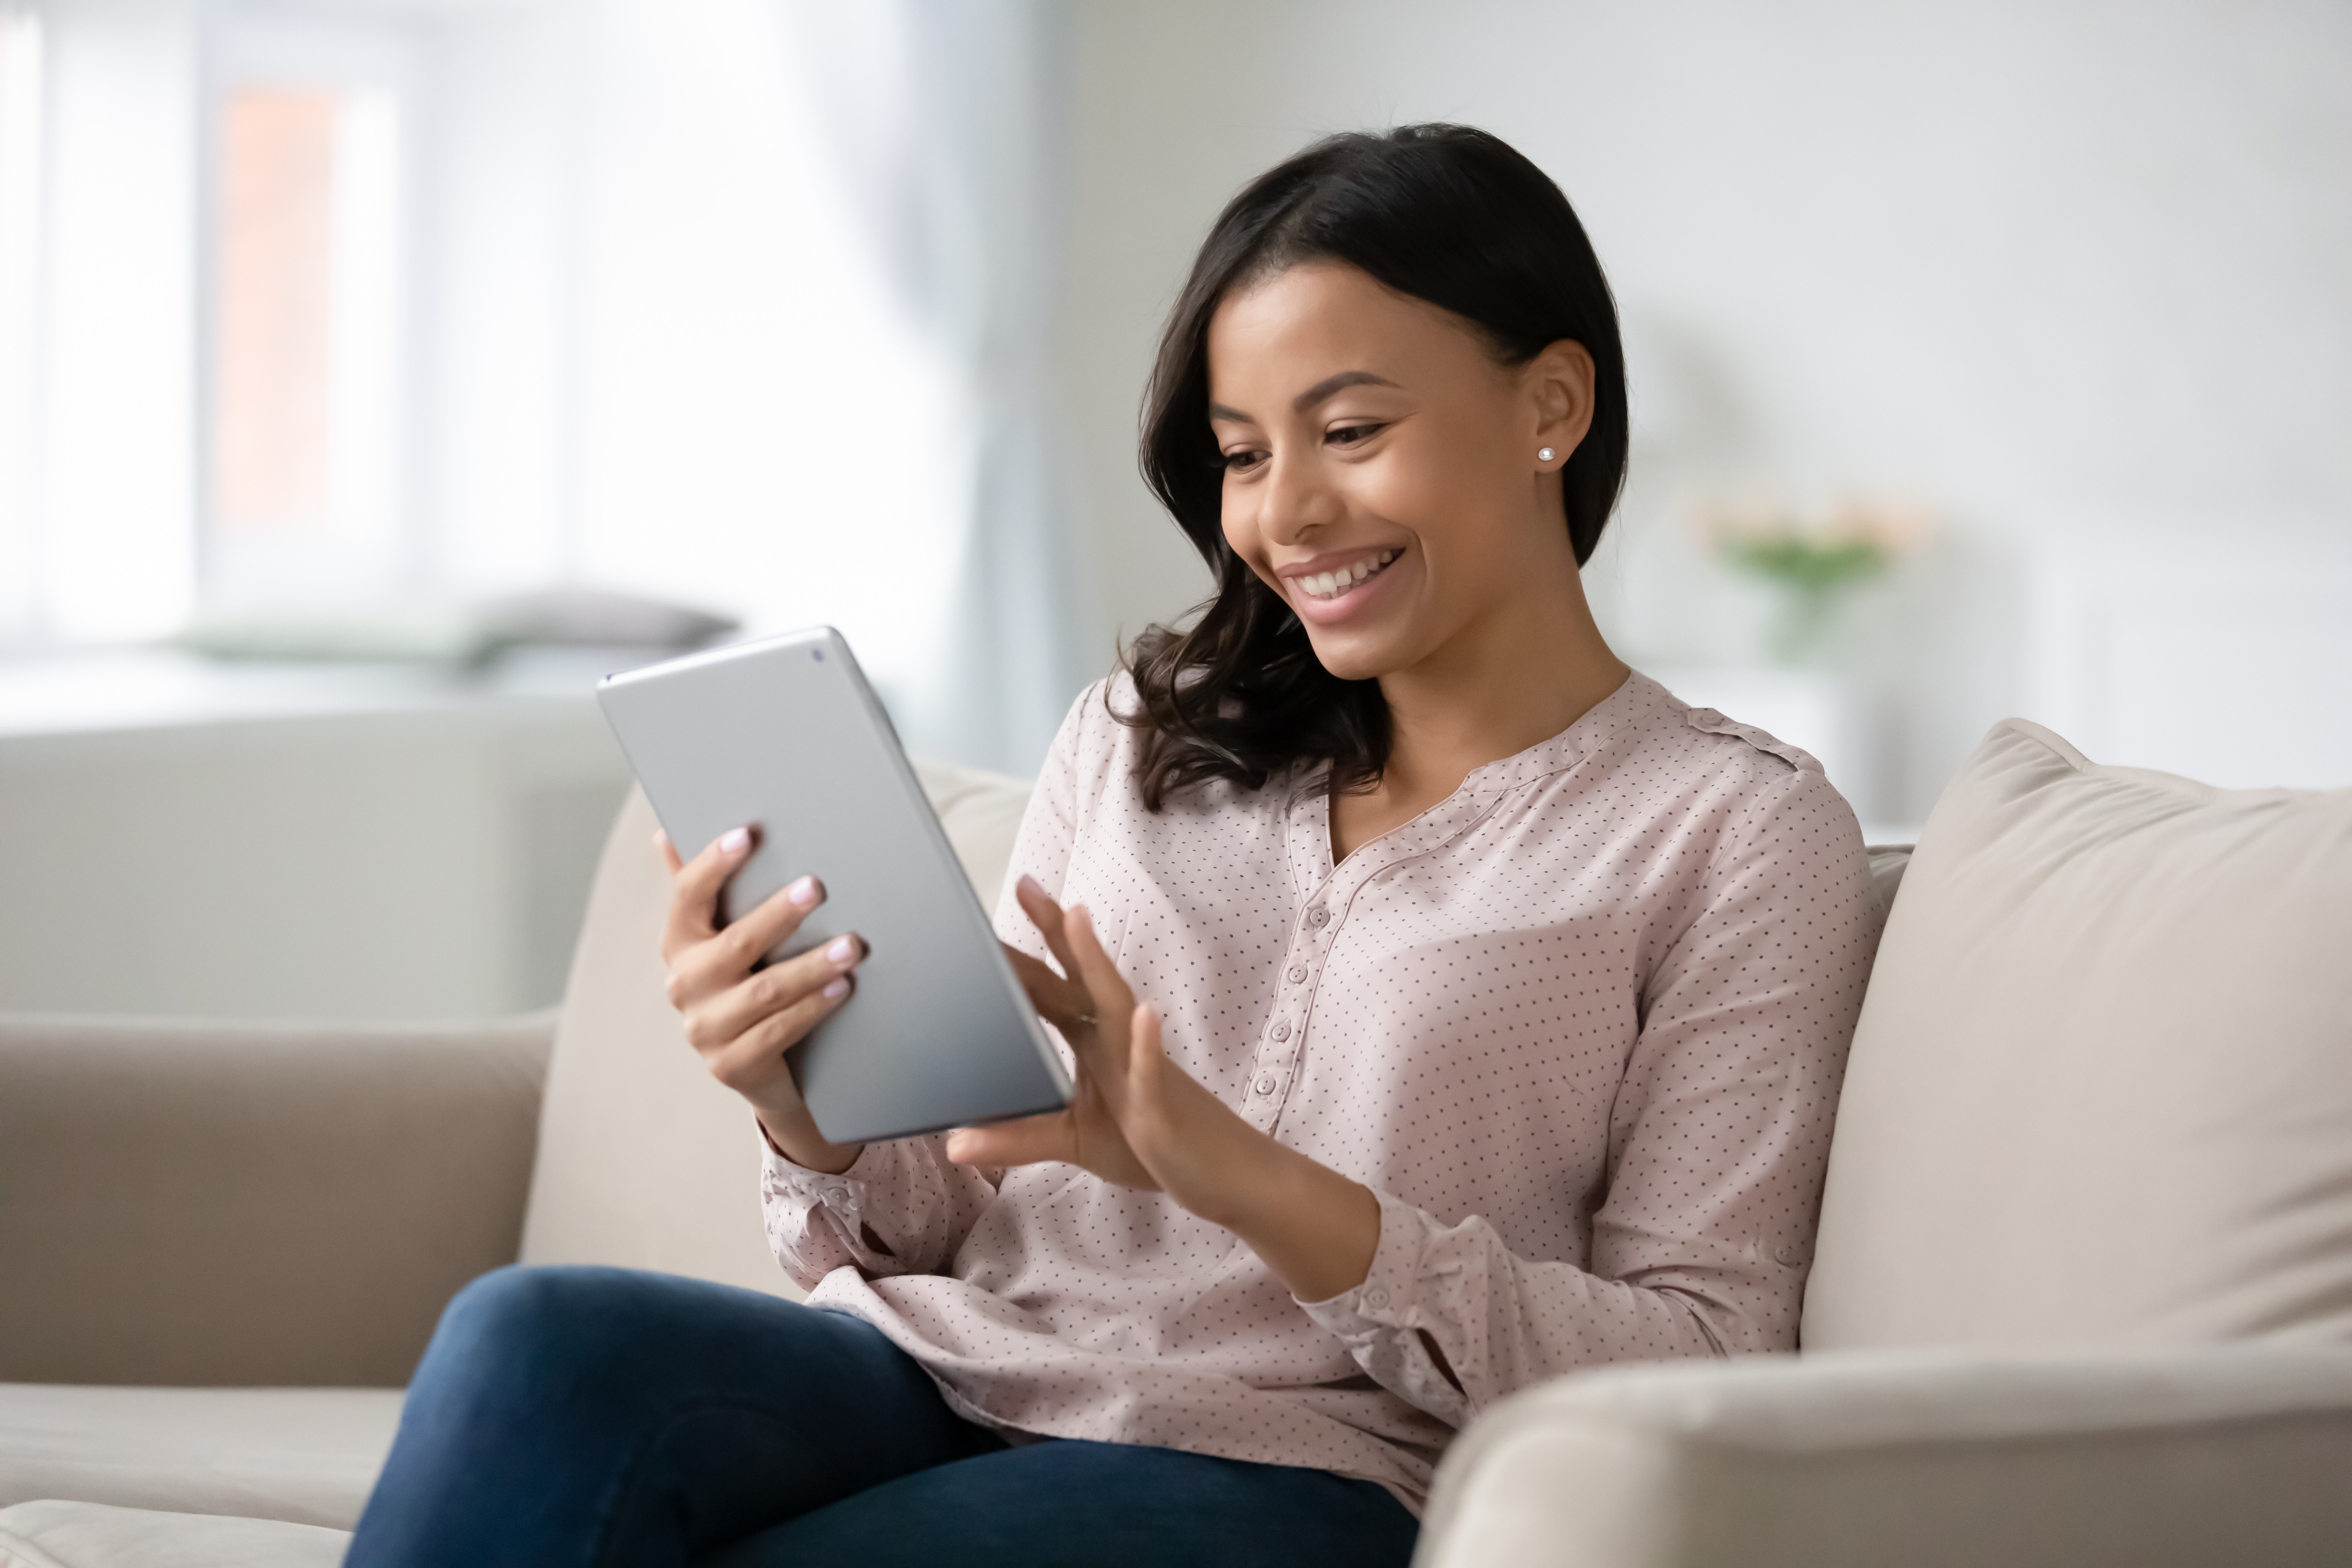 Woman smiling down at her tablet while sitting on couch. 